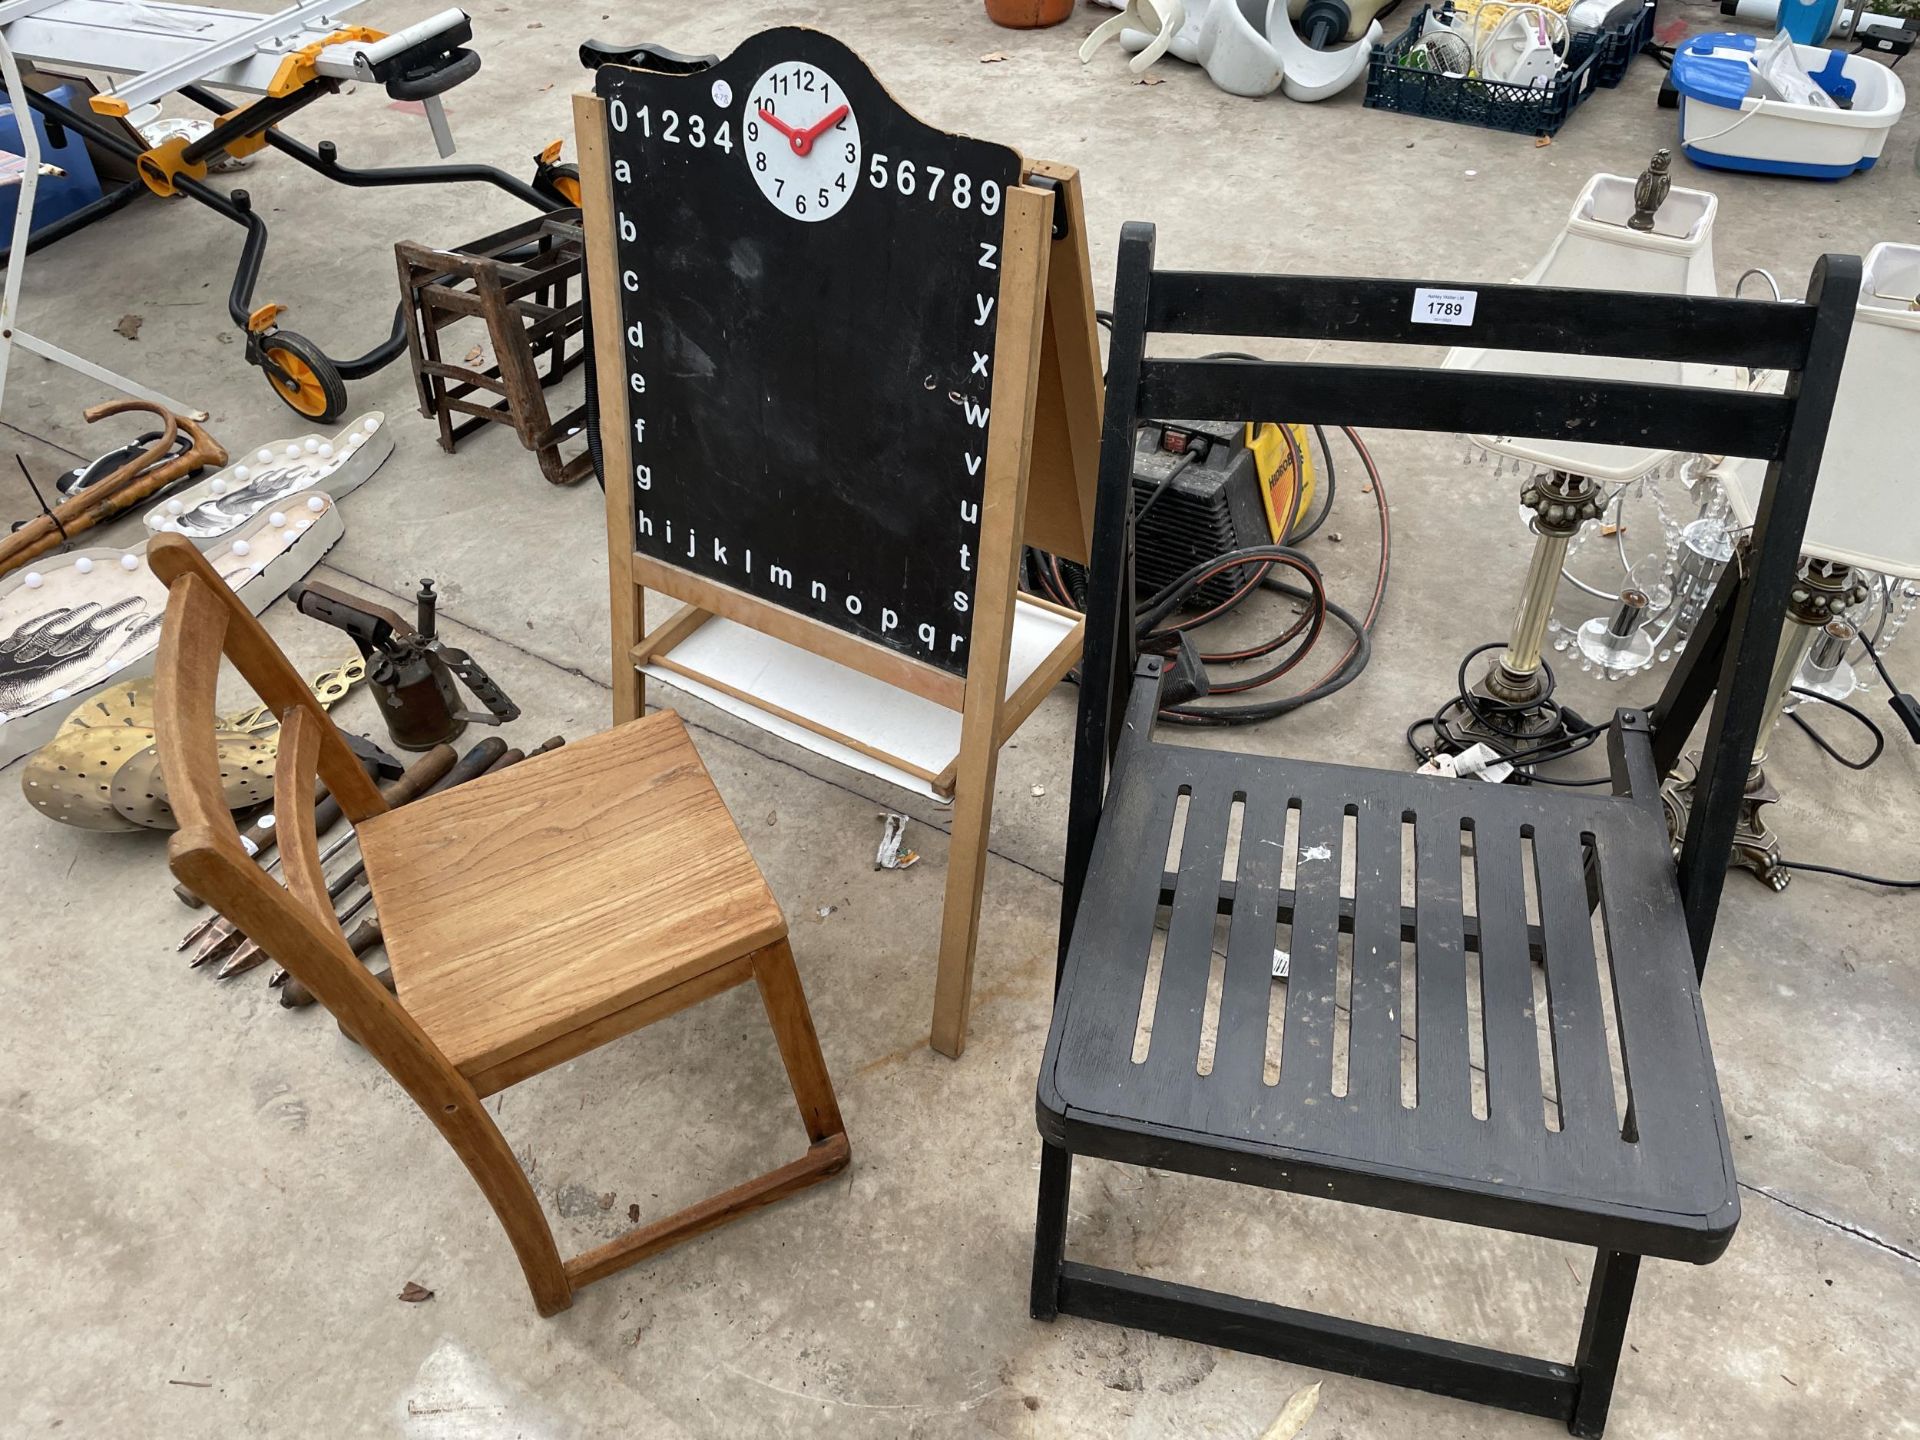 A FOLDING WOODEN CHAIR, A CHILDS CHALK BOARD AND A CHILDS CHAIRS